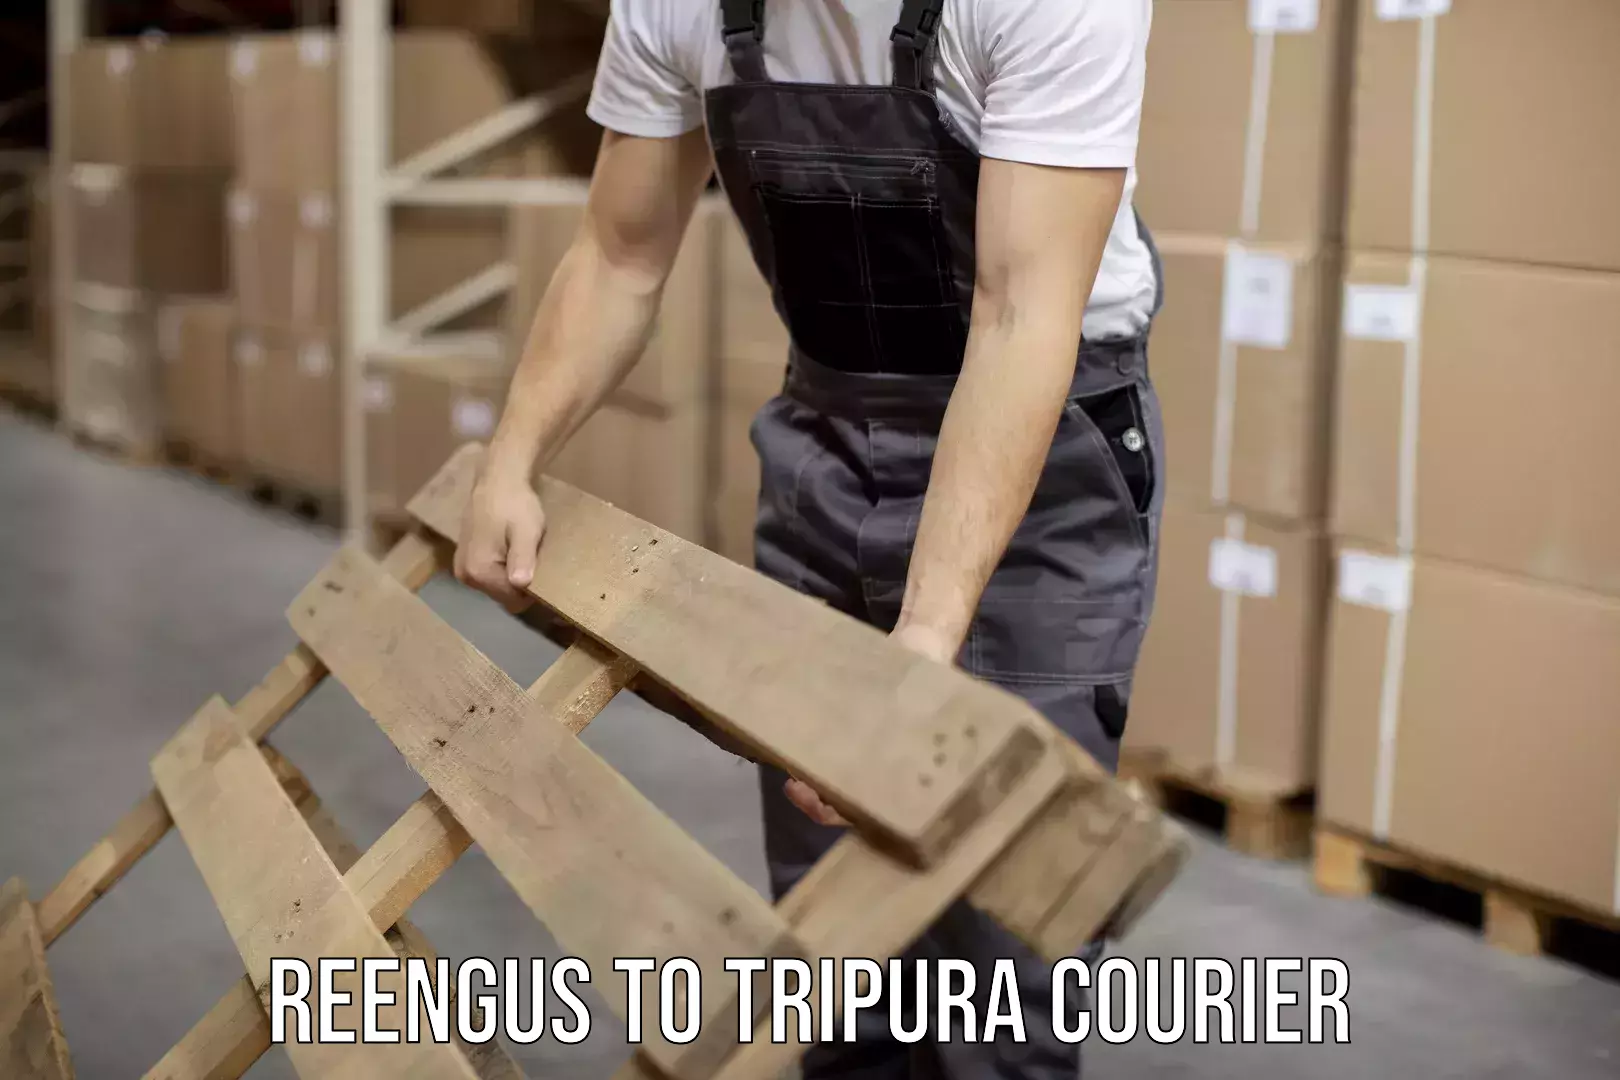 Discount courier rates in Reengus to Tripura